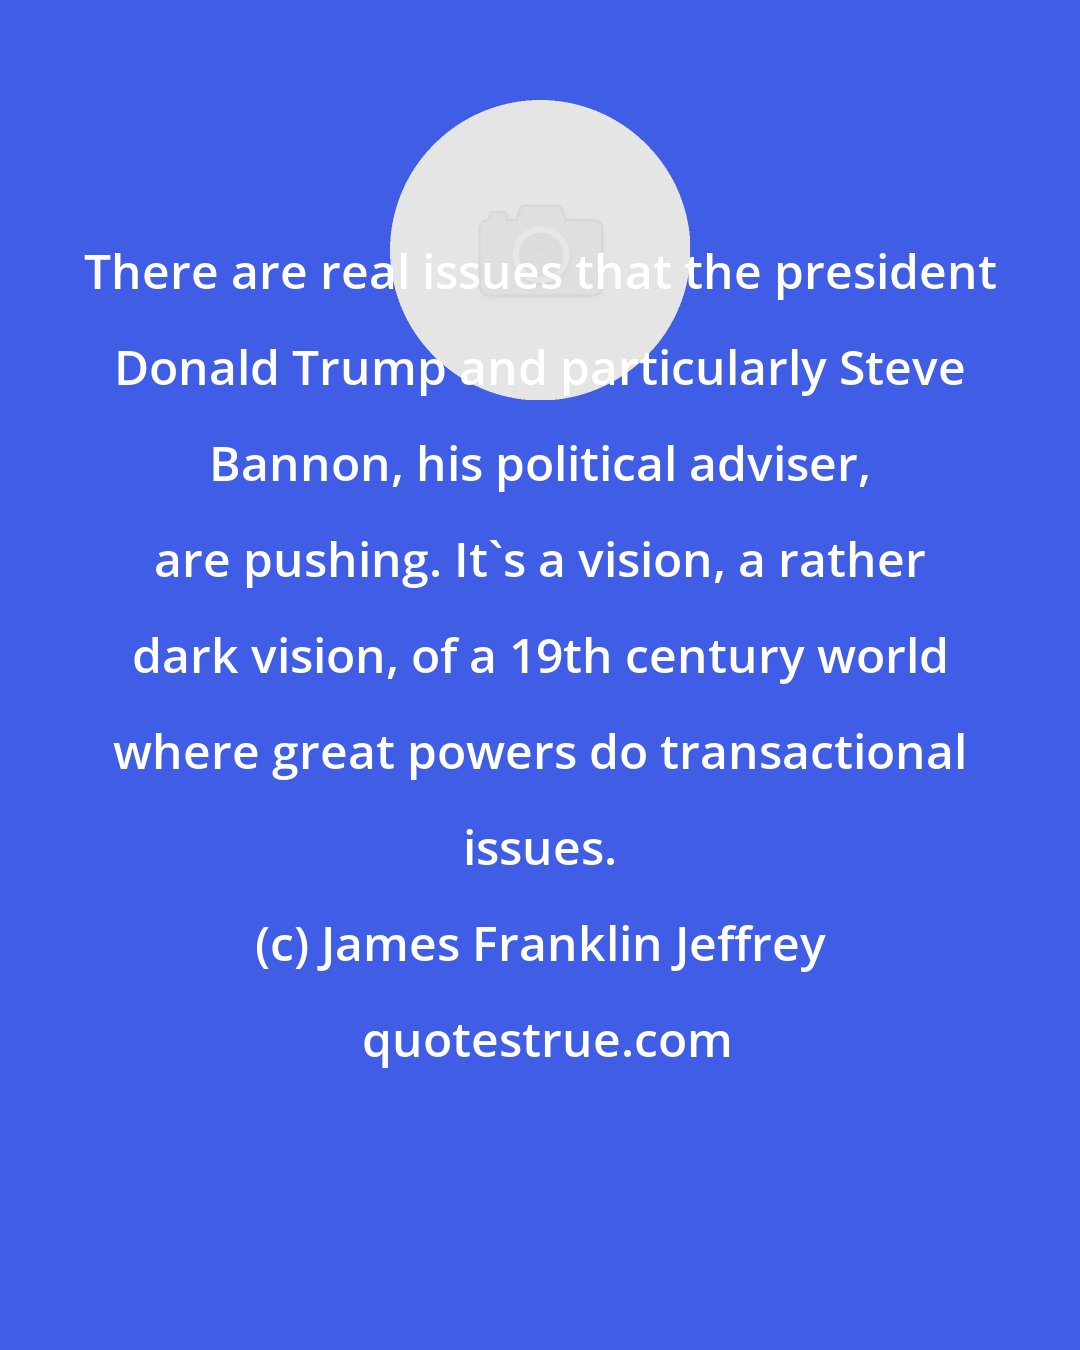 James Franklin Jeffrey: There are real issues that the president Donald Trump and particularly Steve Bannon, his political adviser, are pushing. It's a vision, a rather dark vision, of a 19th century world where great powers do transactional issues.